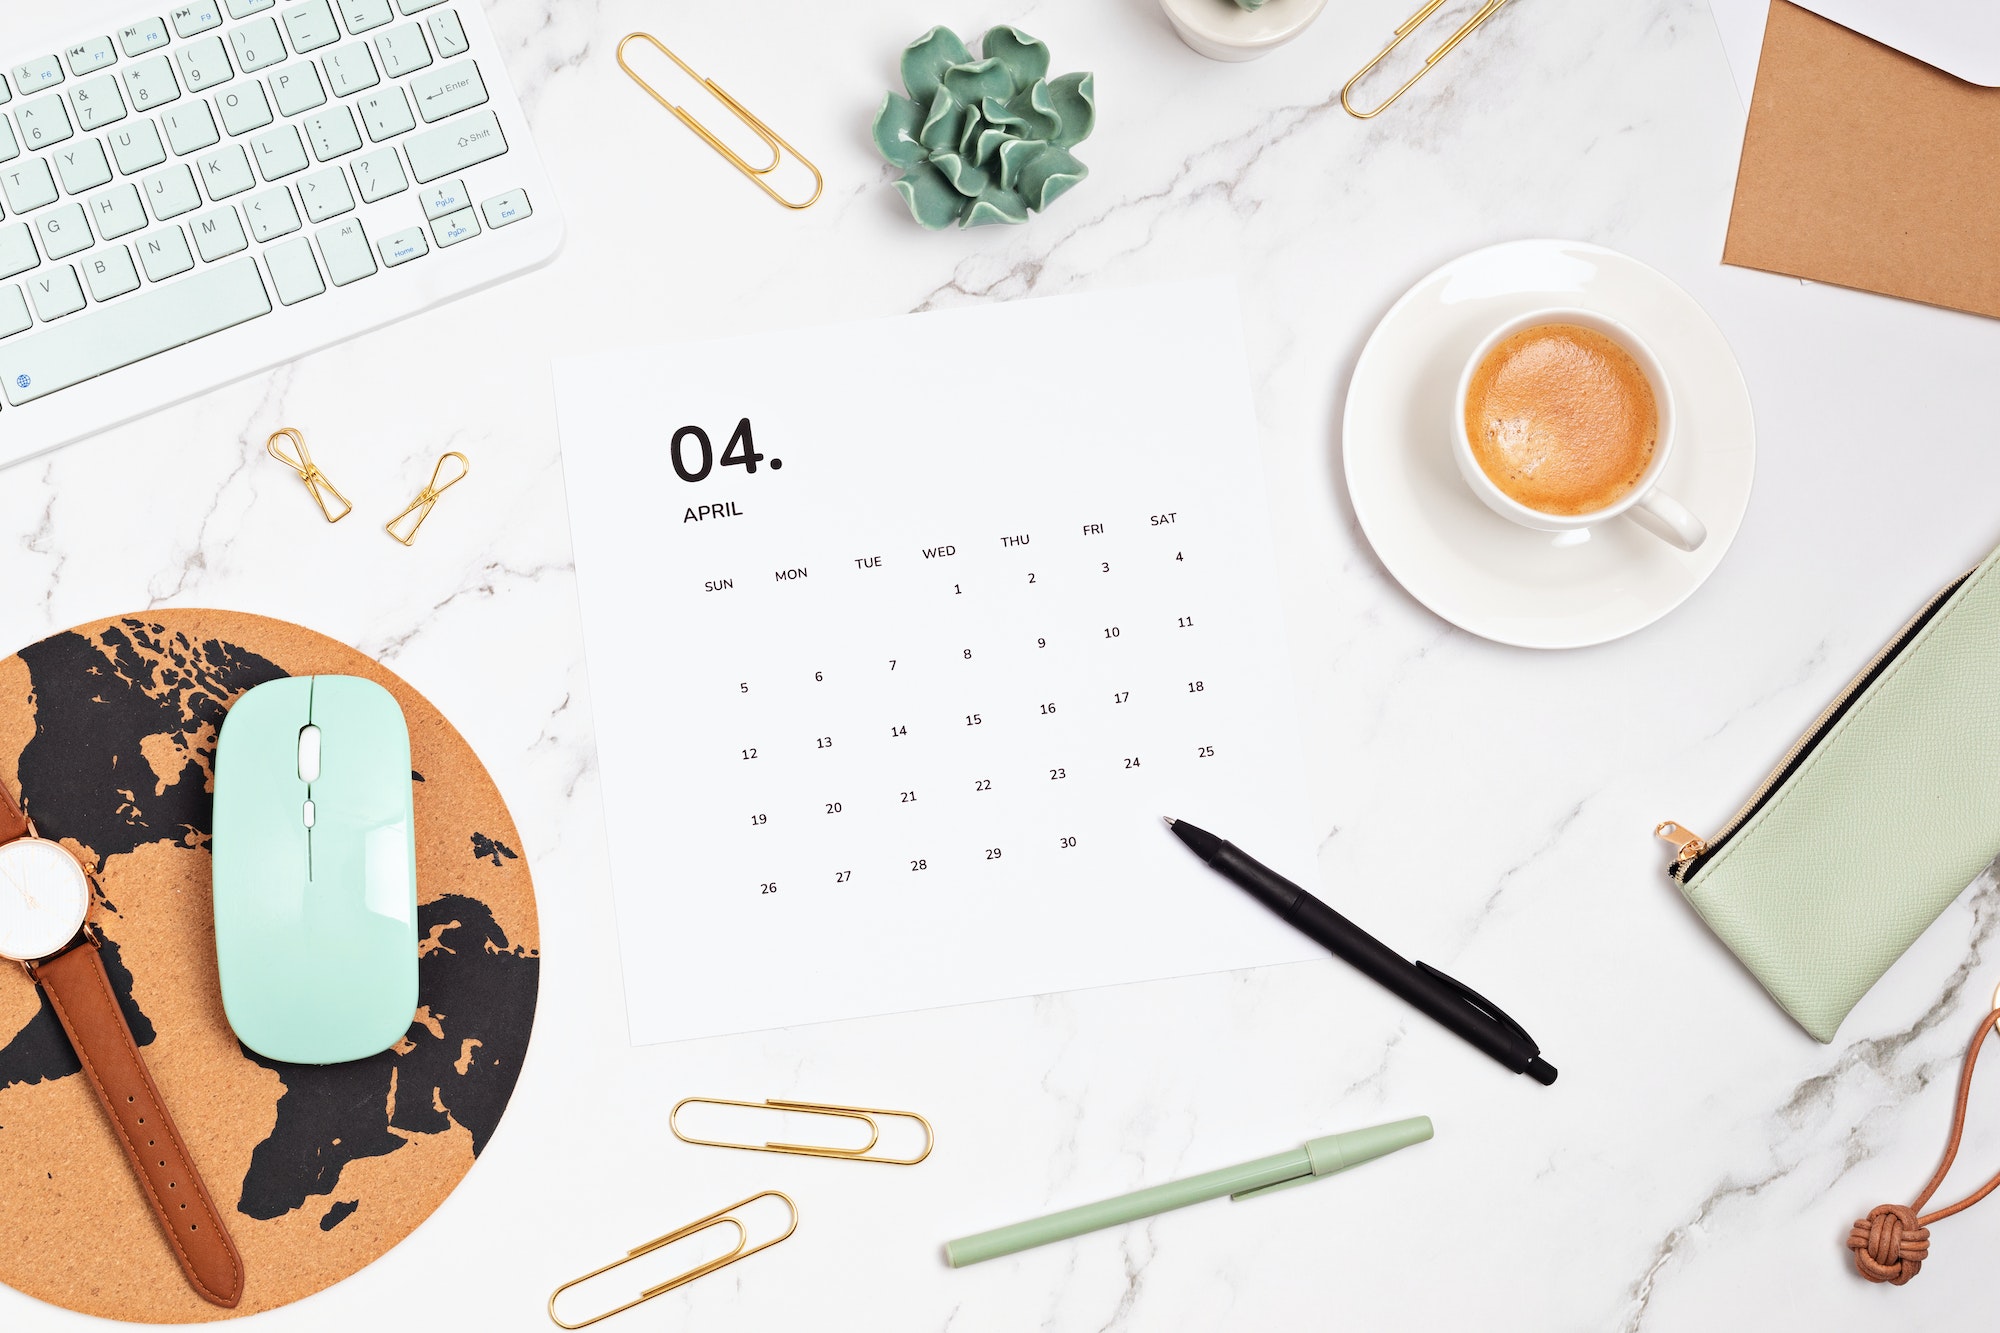 Desktop with calendar for april and office supplies. home office, social media blog, schedule